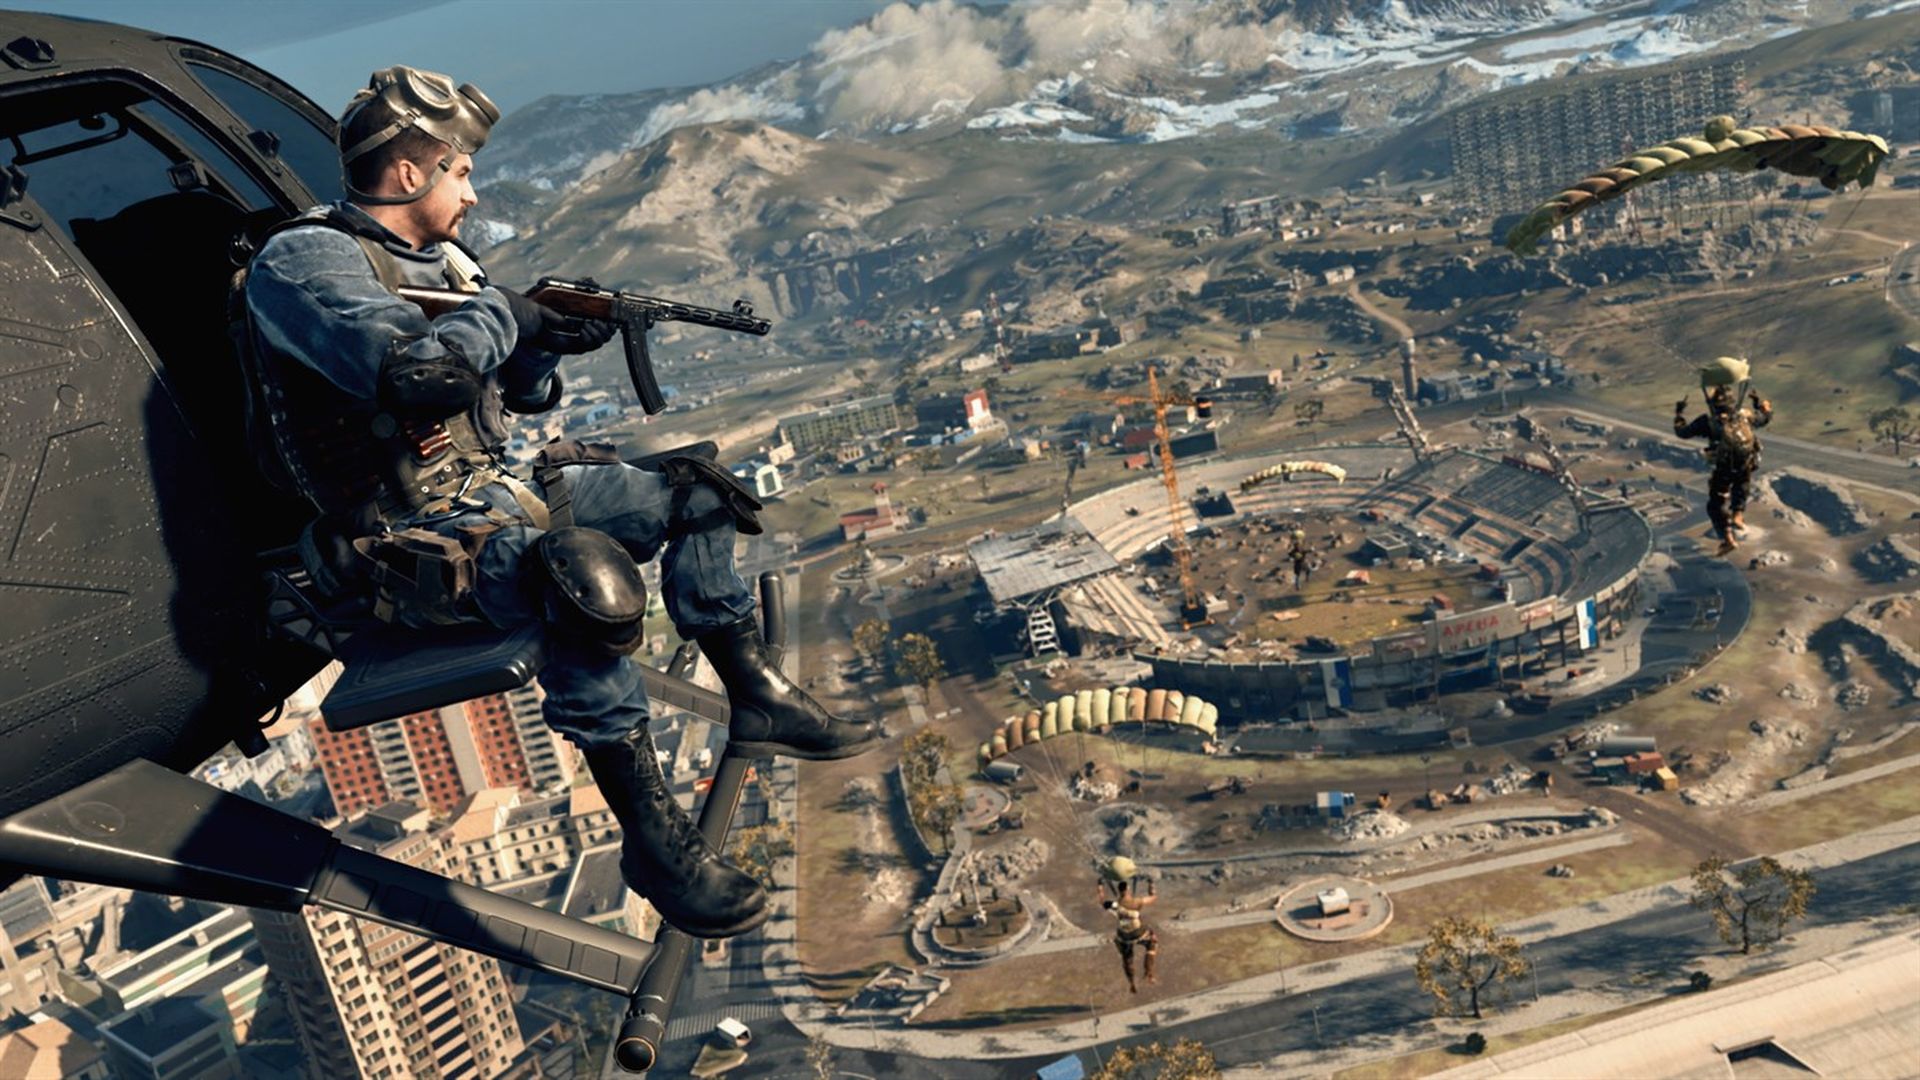 Video game screenshot of a soldier sitting on the side of a military helicopter as it flies over a city